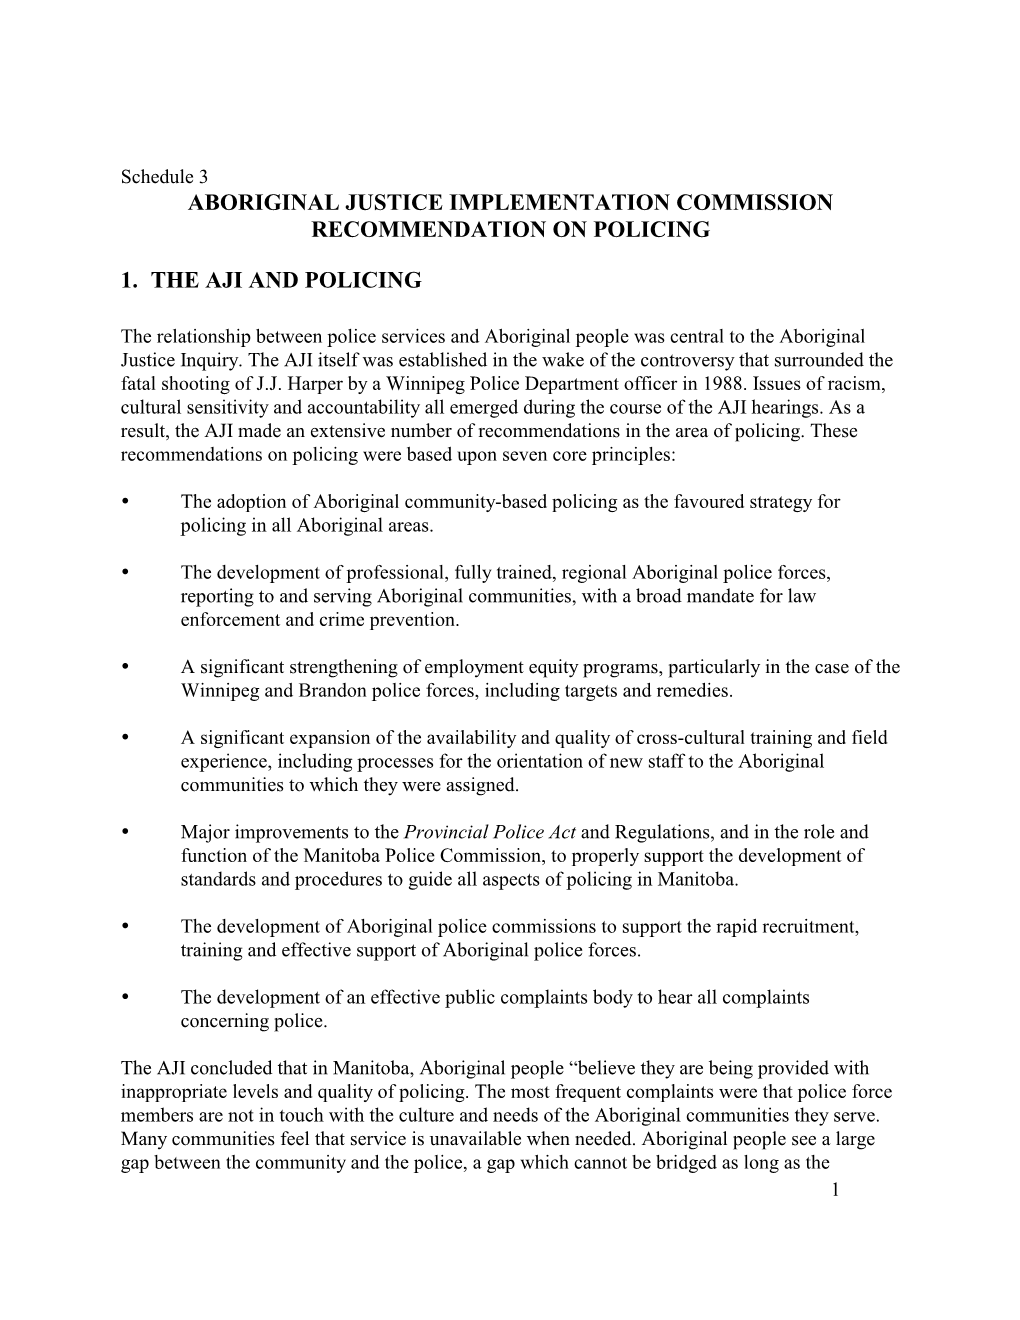 Schedule 3 ABORIGINAL JUSTICE IMPLEMENTATION COMMISSION RECOMMENDATION on POLICING